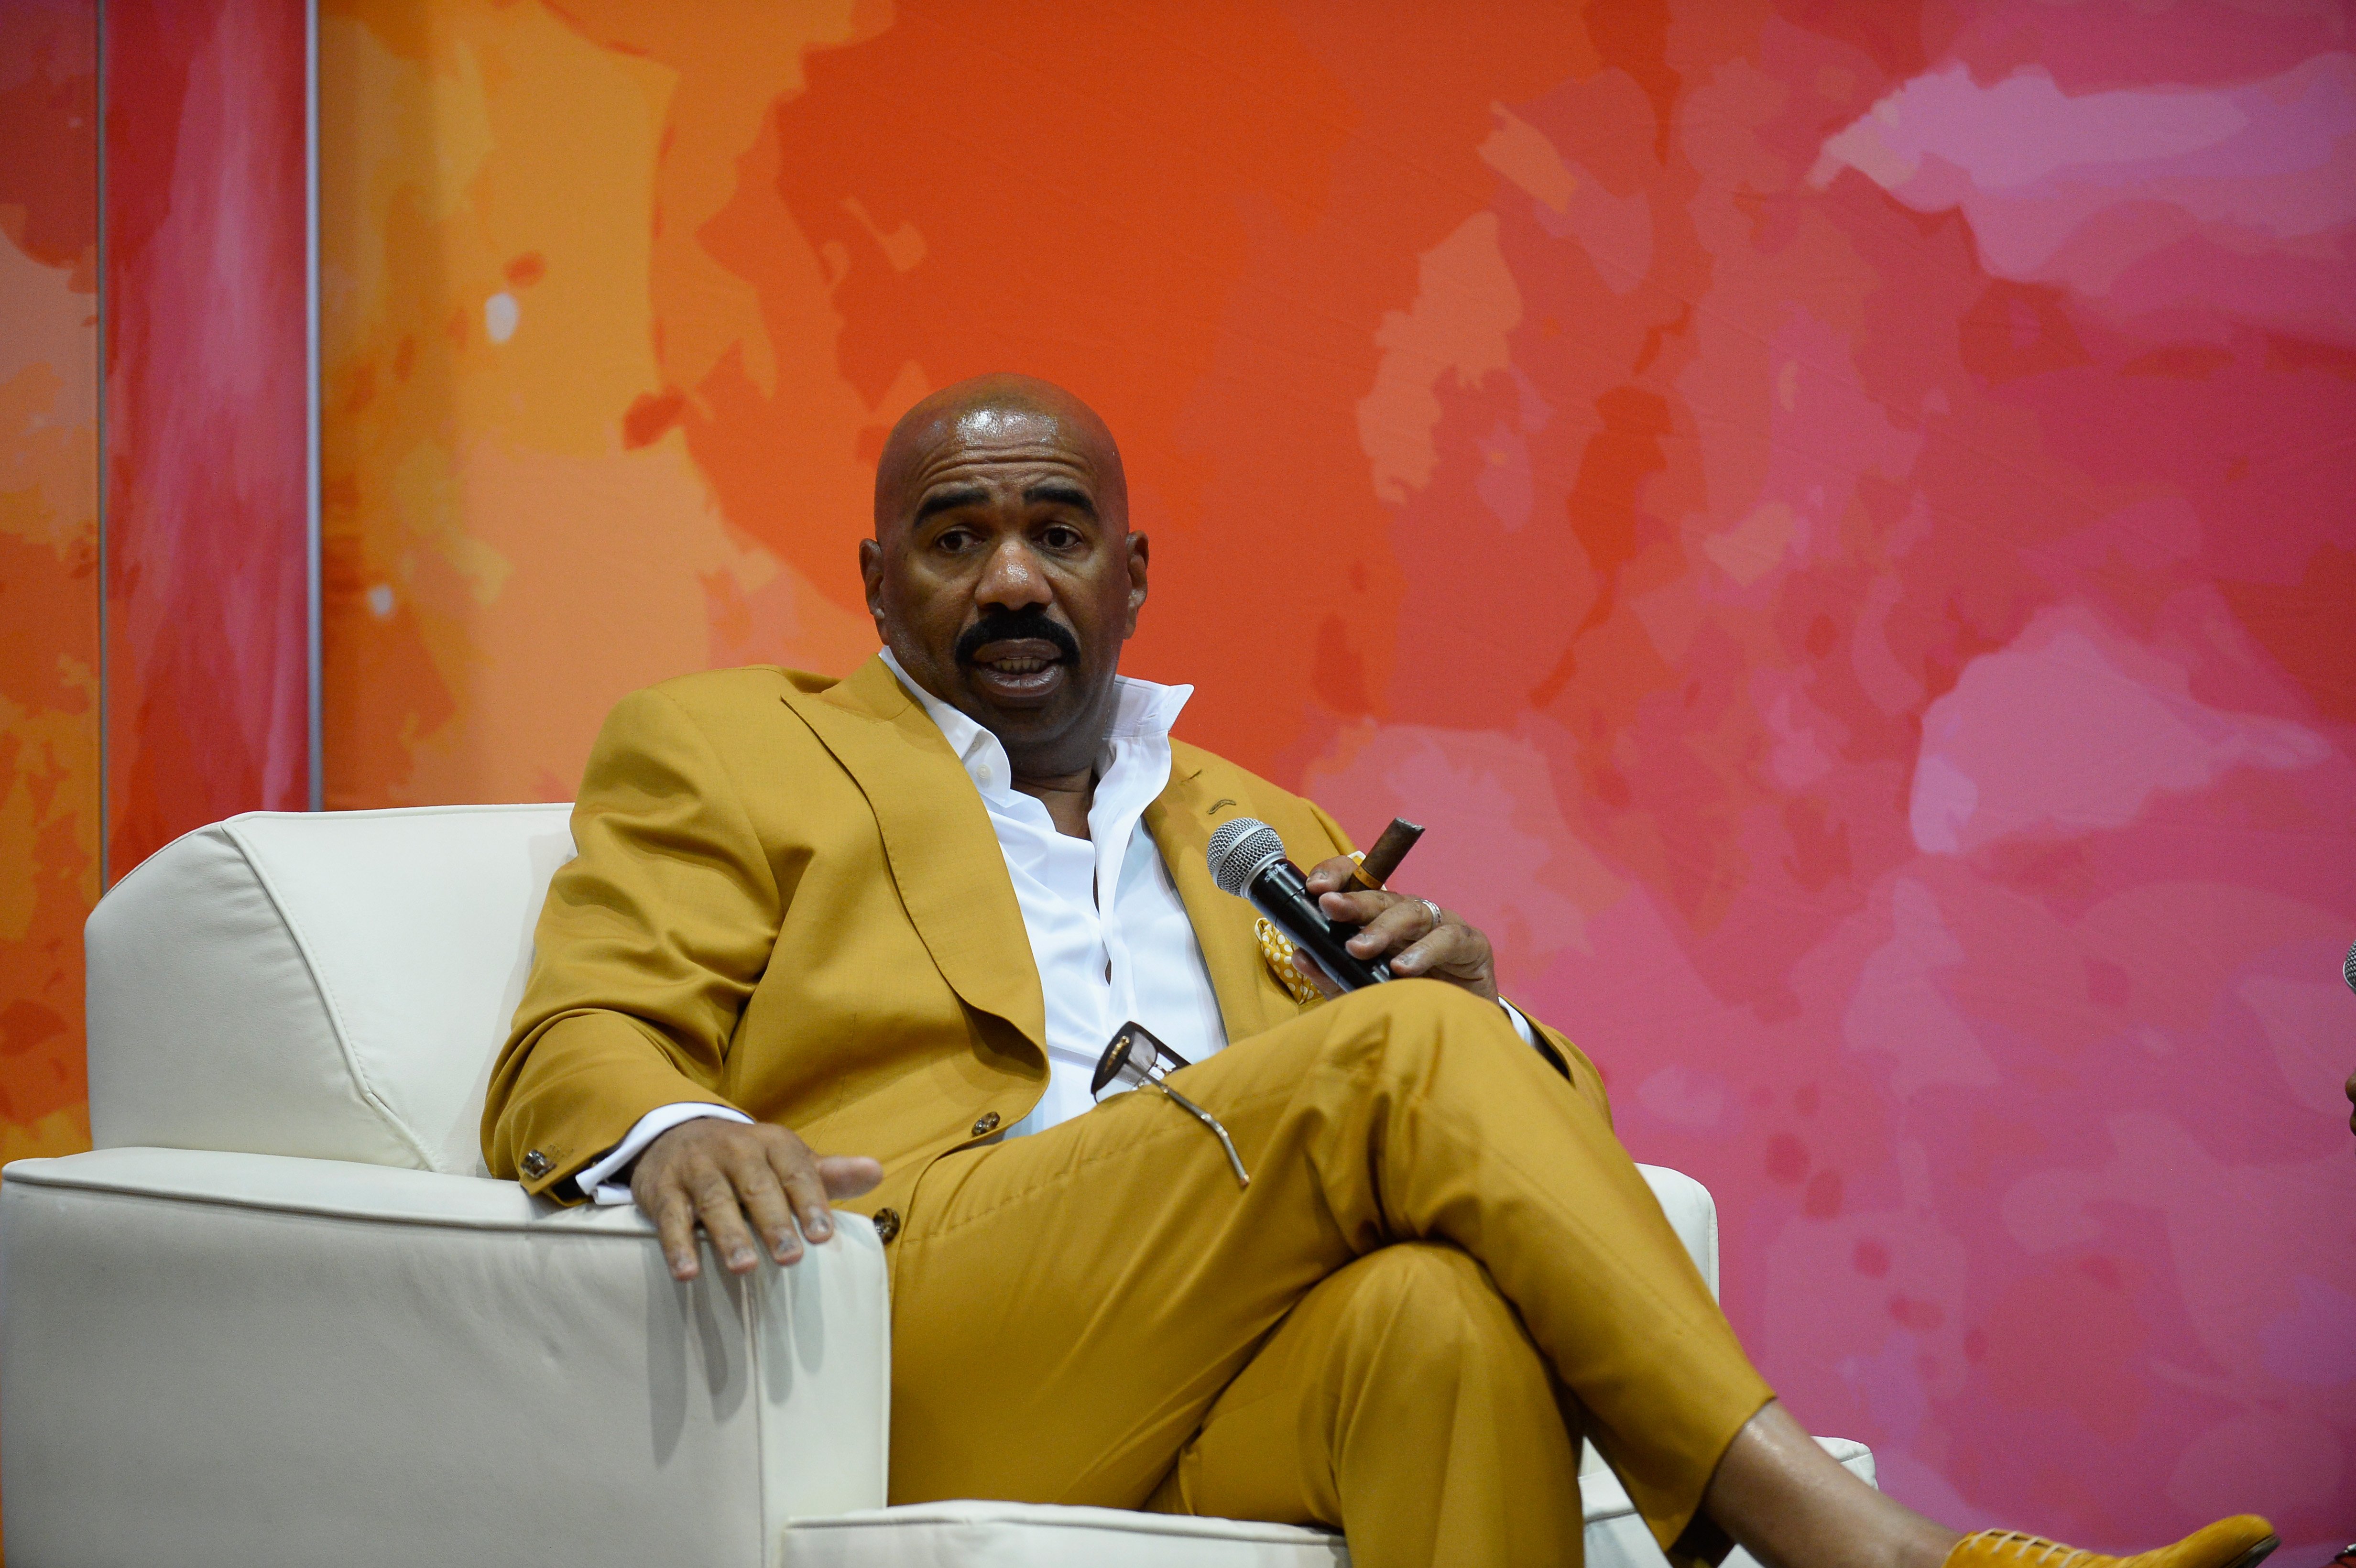 Steve Harvey speaks at the State Farm Color Full Lives Art Gallery during the 2016 State Farm Neighborhood Awards at Mandalay Bay Resort and Casino on July 22, 2016 in Las Vegas, Nevada. | Photo: GettyImages/Global Images of Ukraine